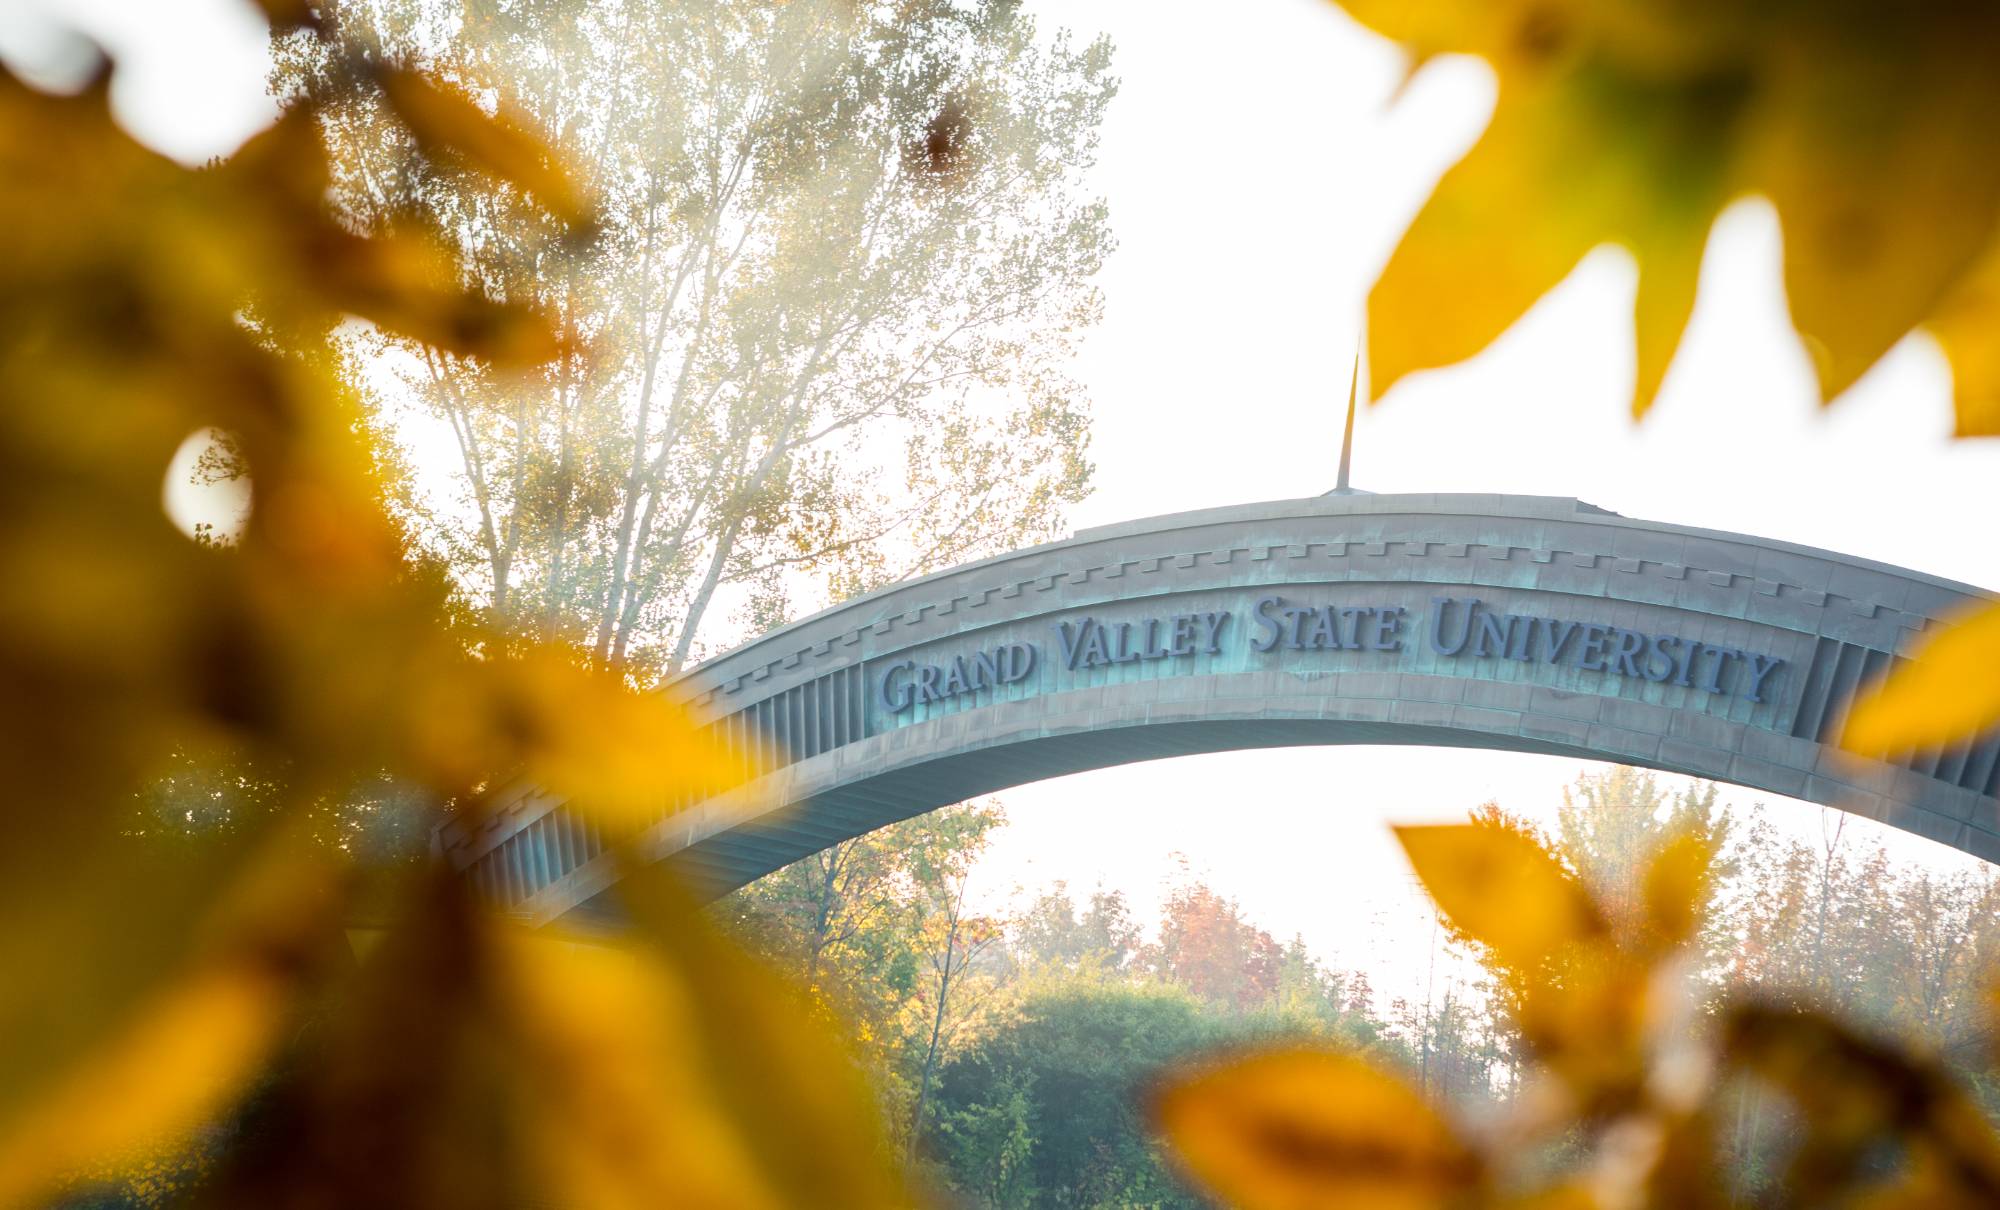 GVSU Entrance Arch in the early morning with fall leaves around it